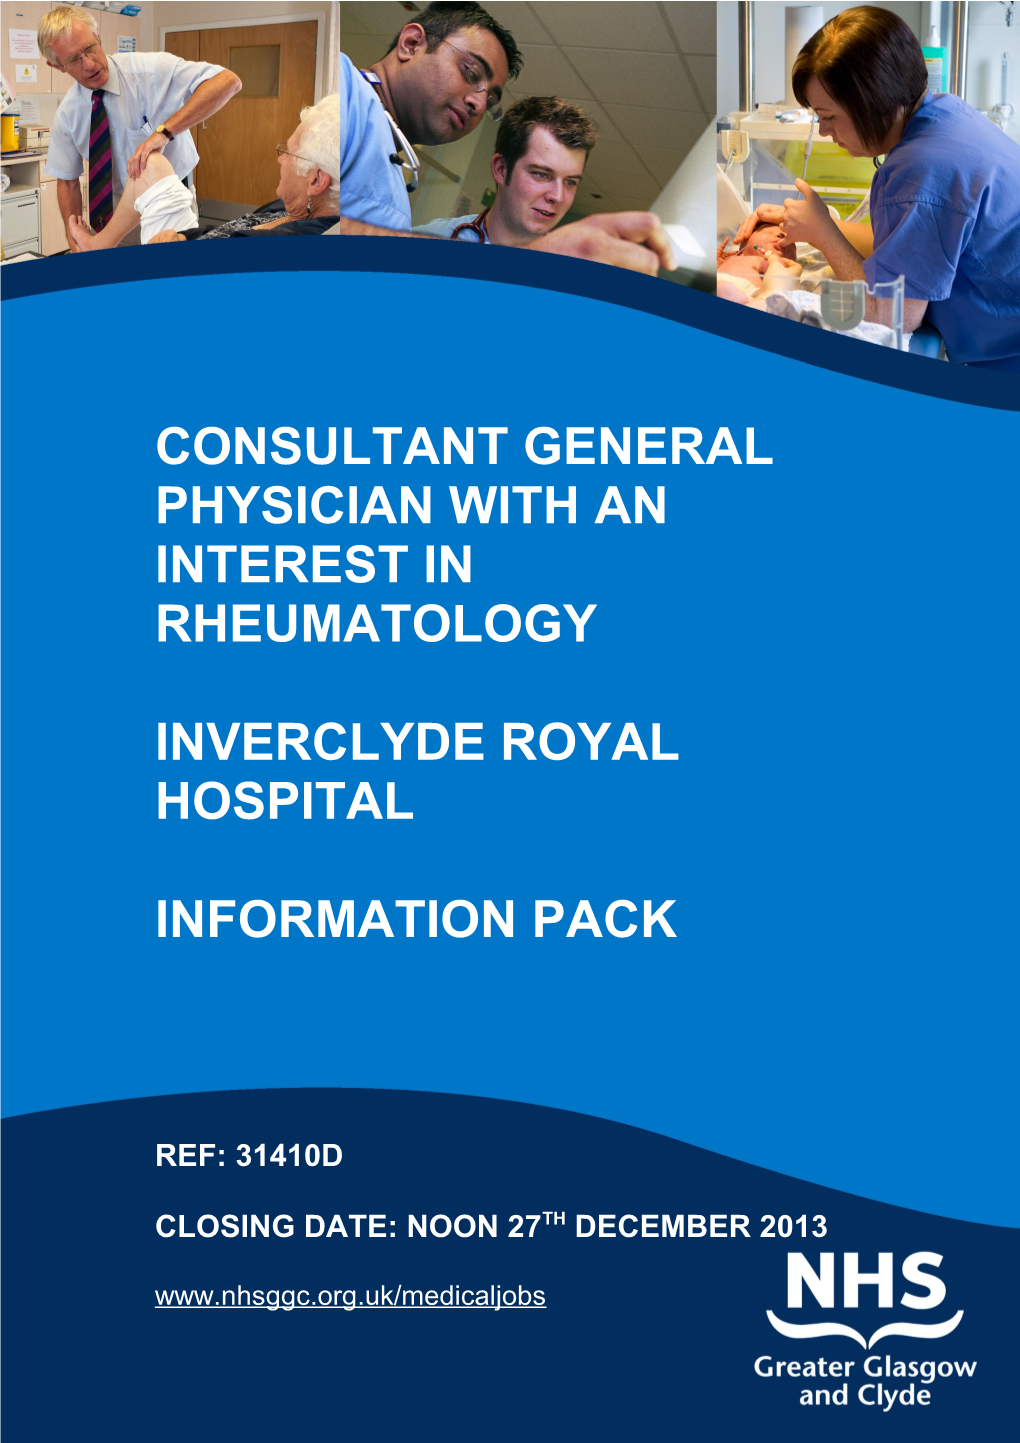 Consultant General Physician with an Interest in Rheumatology